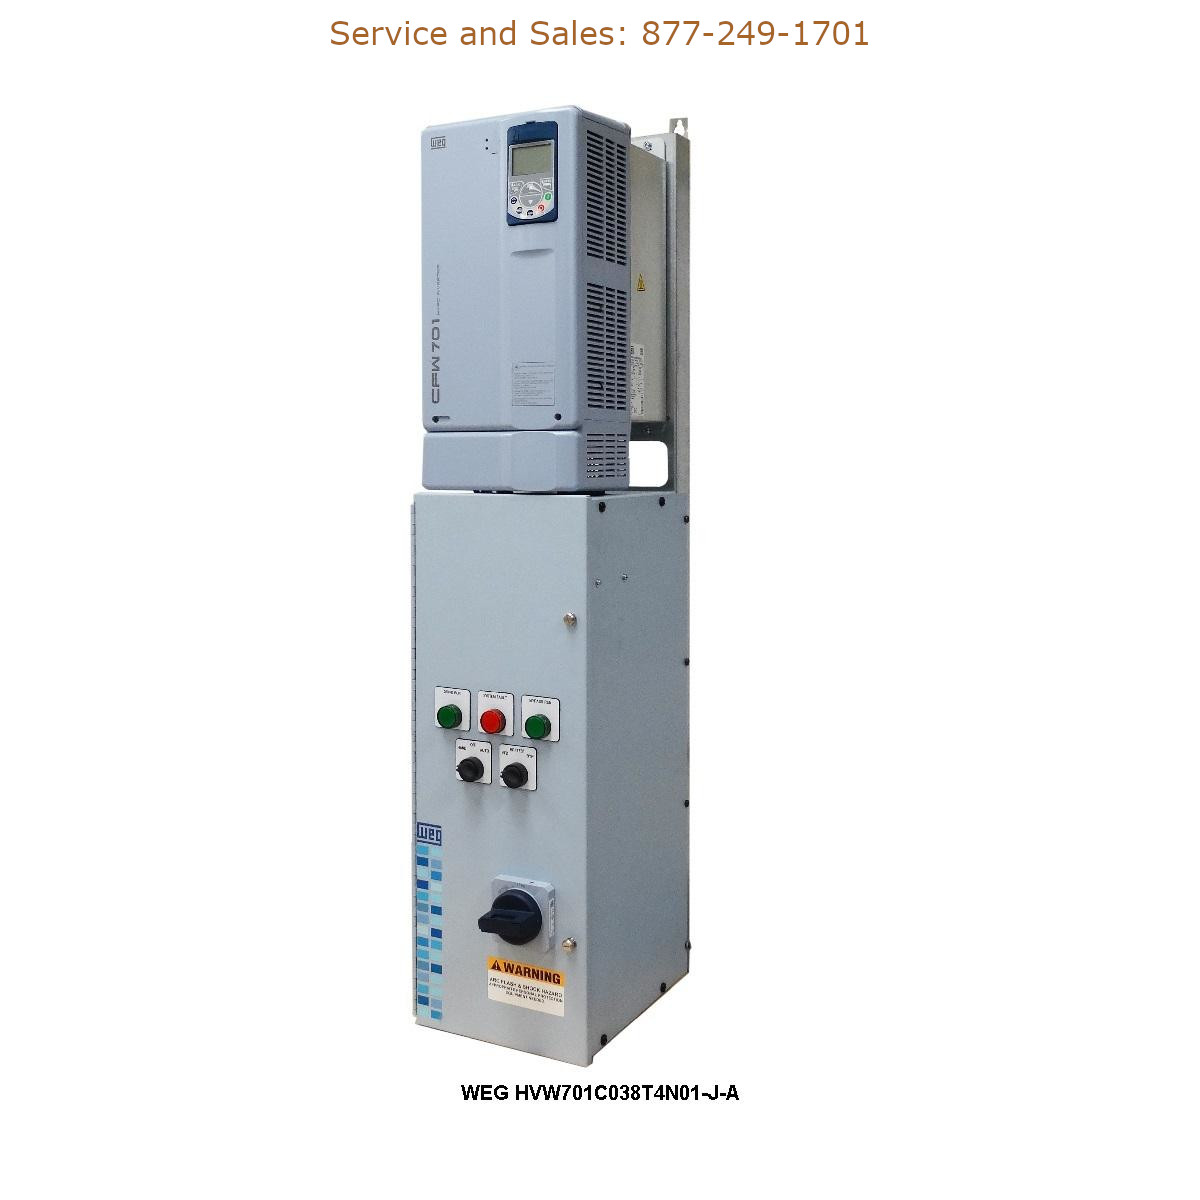 WEG HVW701C038T4N01-J-A WEG Model Number HVW701C038T4N01-J-A WEG Drives, Variable Speed Drives Repair Service, Troubleshooting, Replacement Parts https://gesrepair.com/wp-content/uploads/2022/WEG/WEG_HVW701C038T4N01-J-A_Drives_Variable_Speed_Drives.jpg